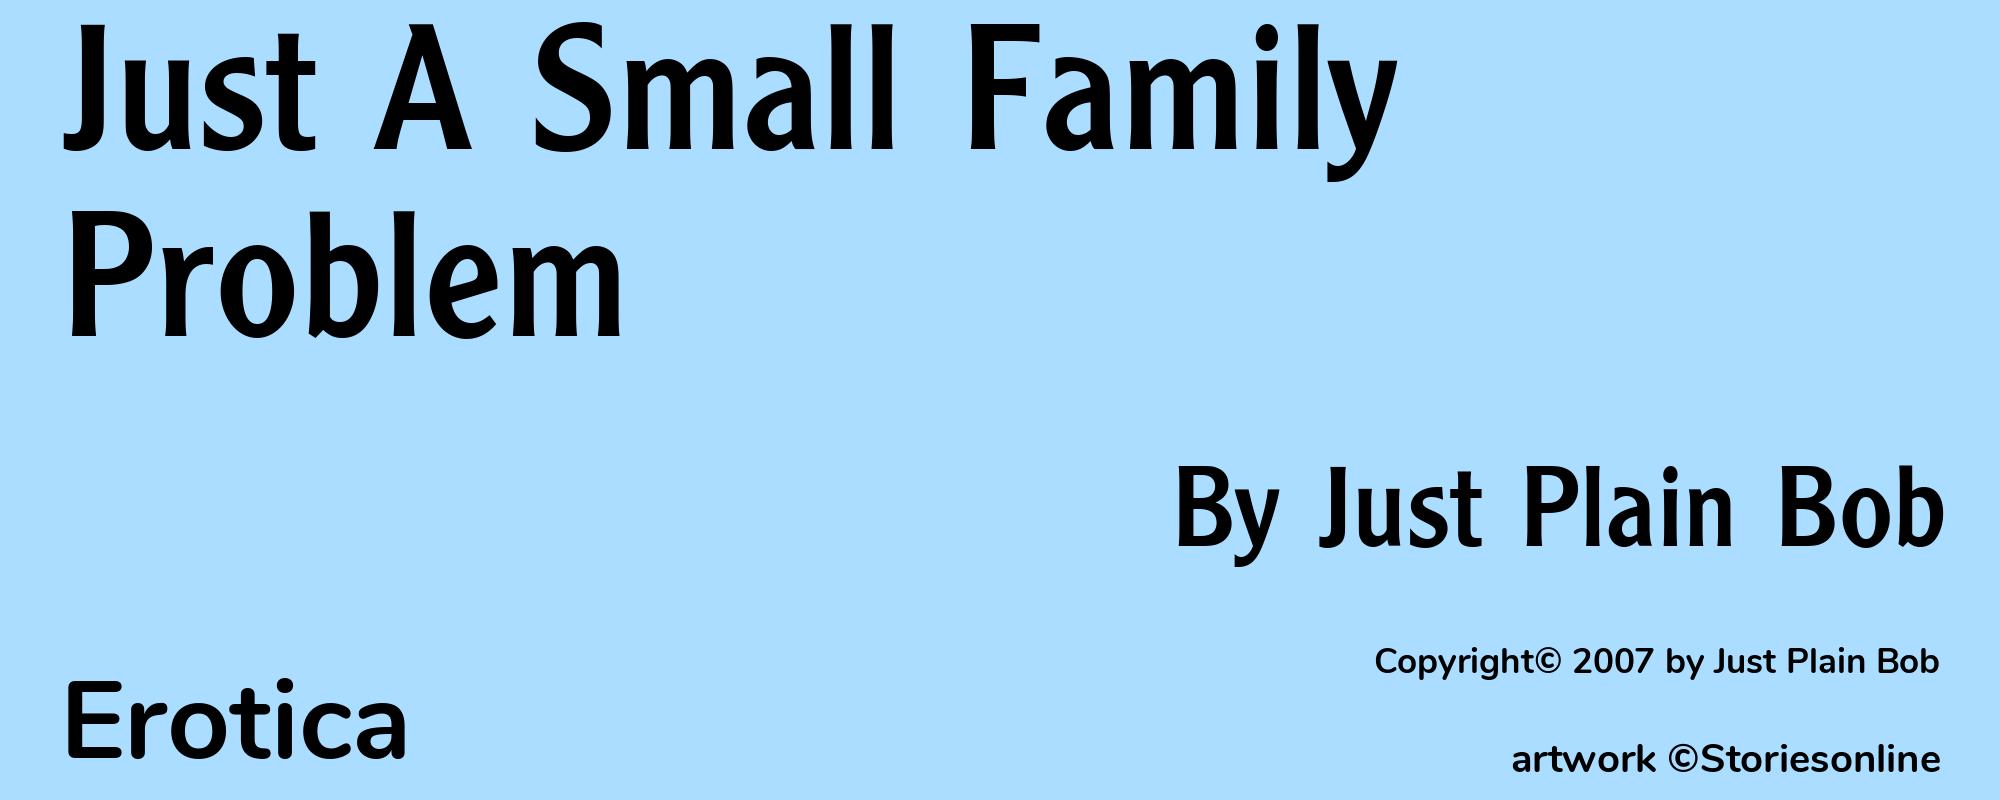 Just A Small Family Problem - Cover